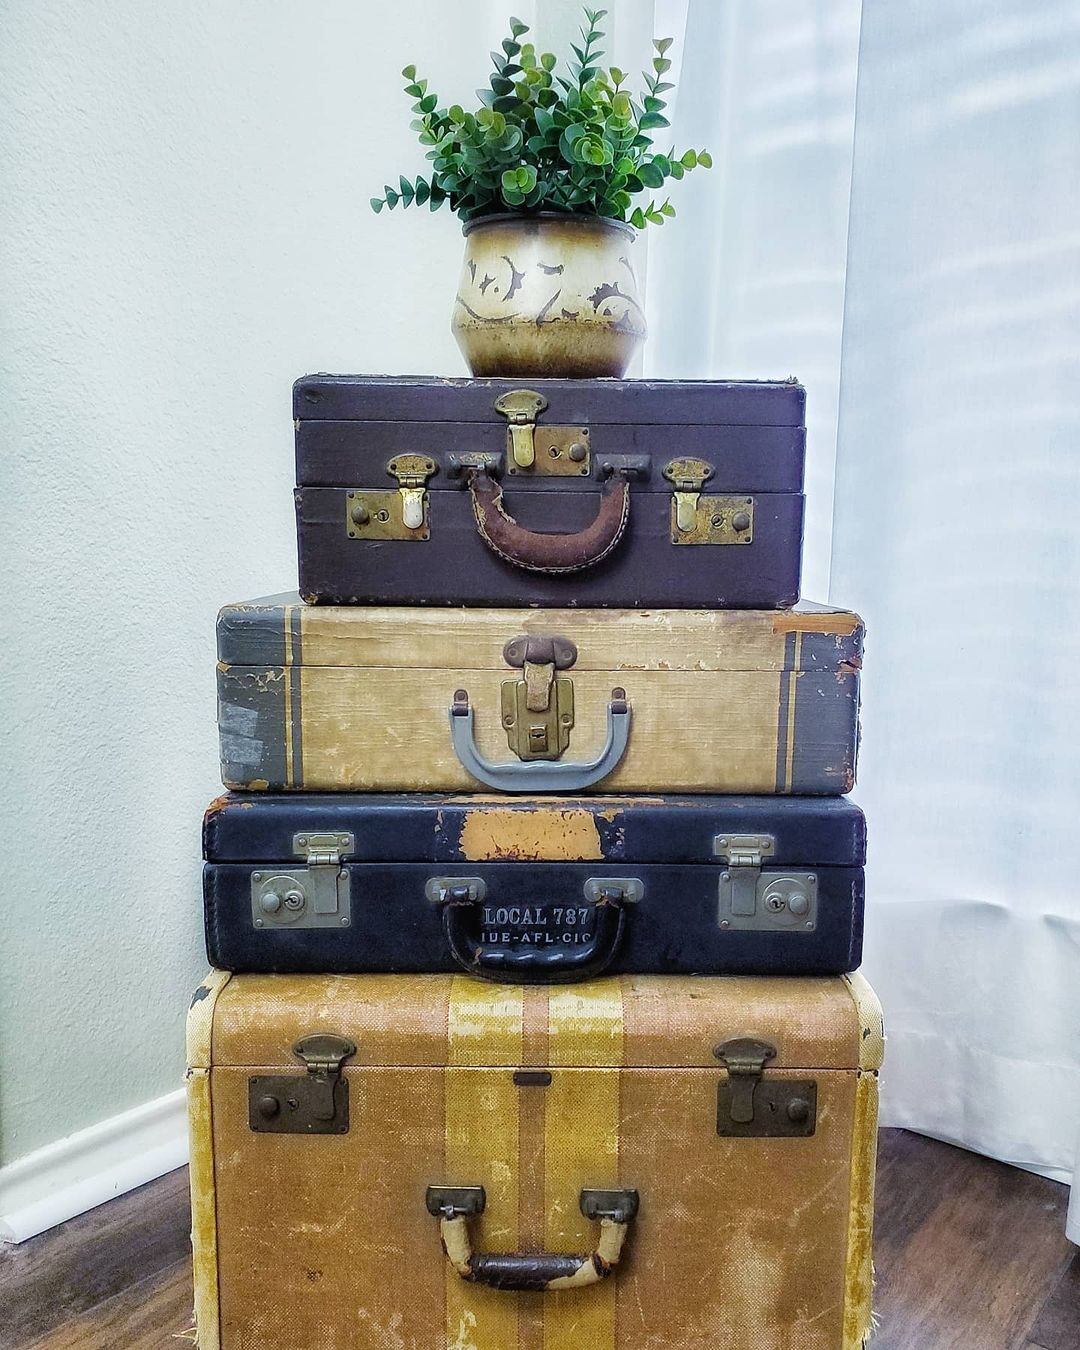 Four stacked trunks used as repurposed decor. Photo by Instagram User @lifeonclearance